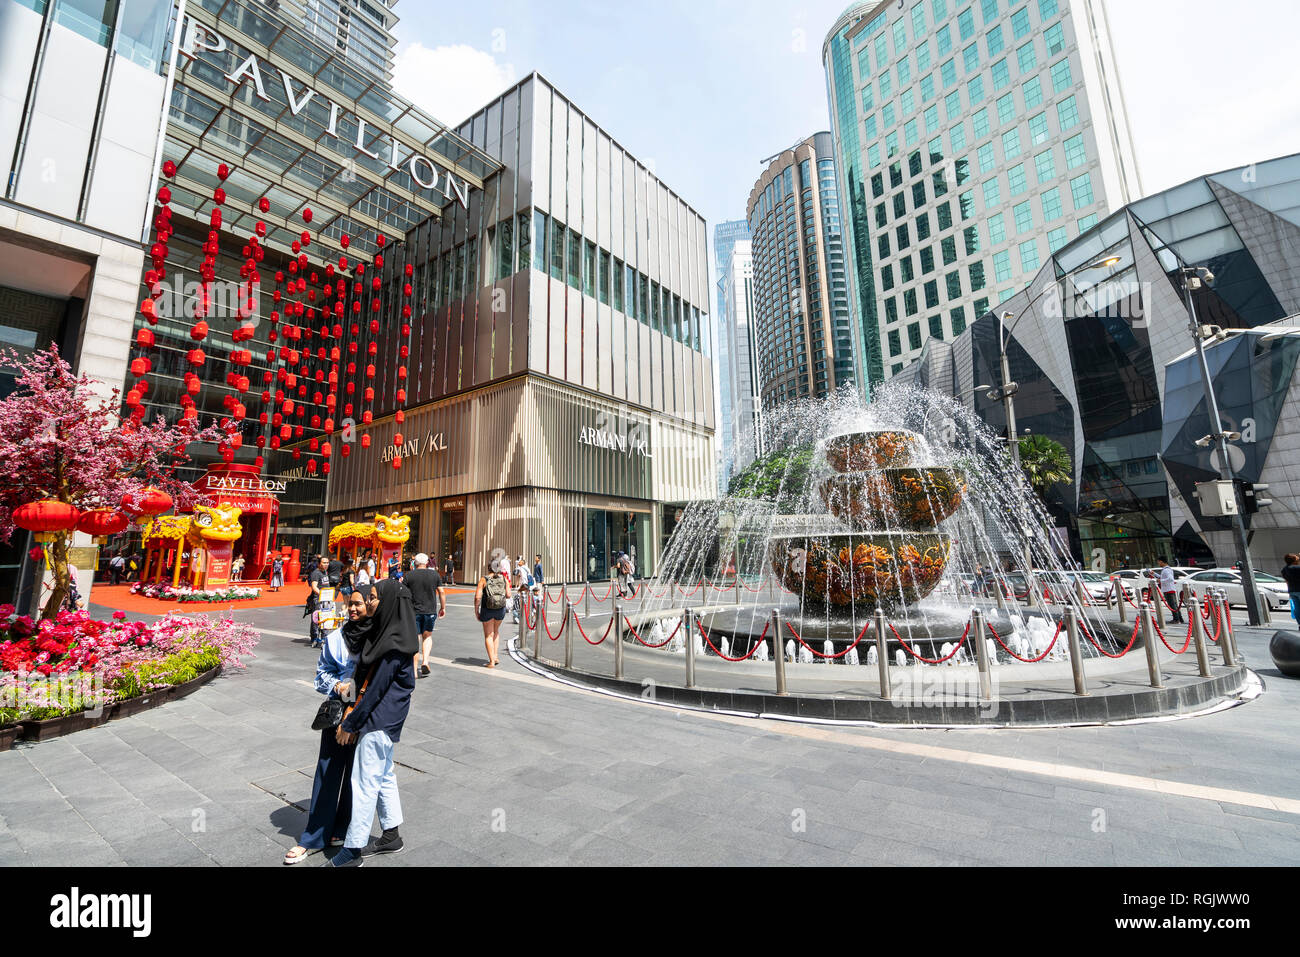 A view of  Pavilion mall building in Kuala Lumpur, Malaysia Stock Photo